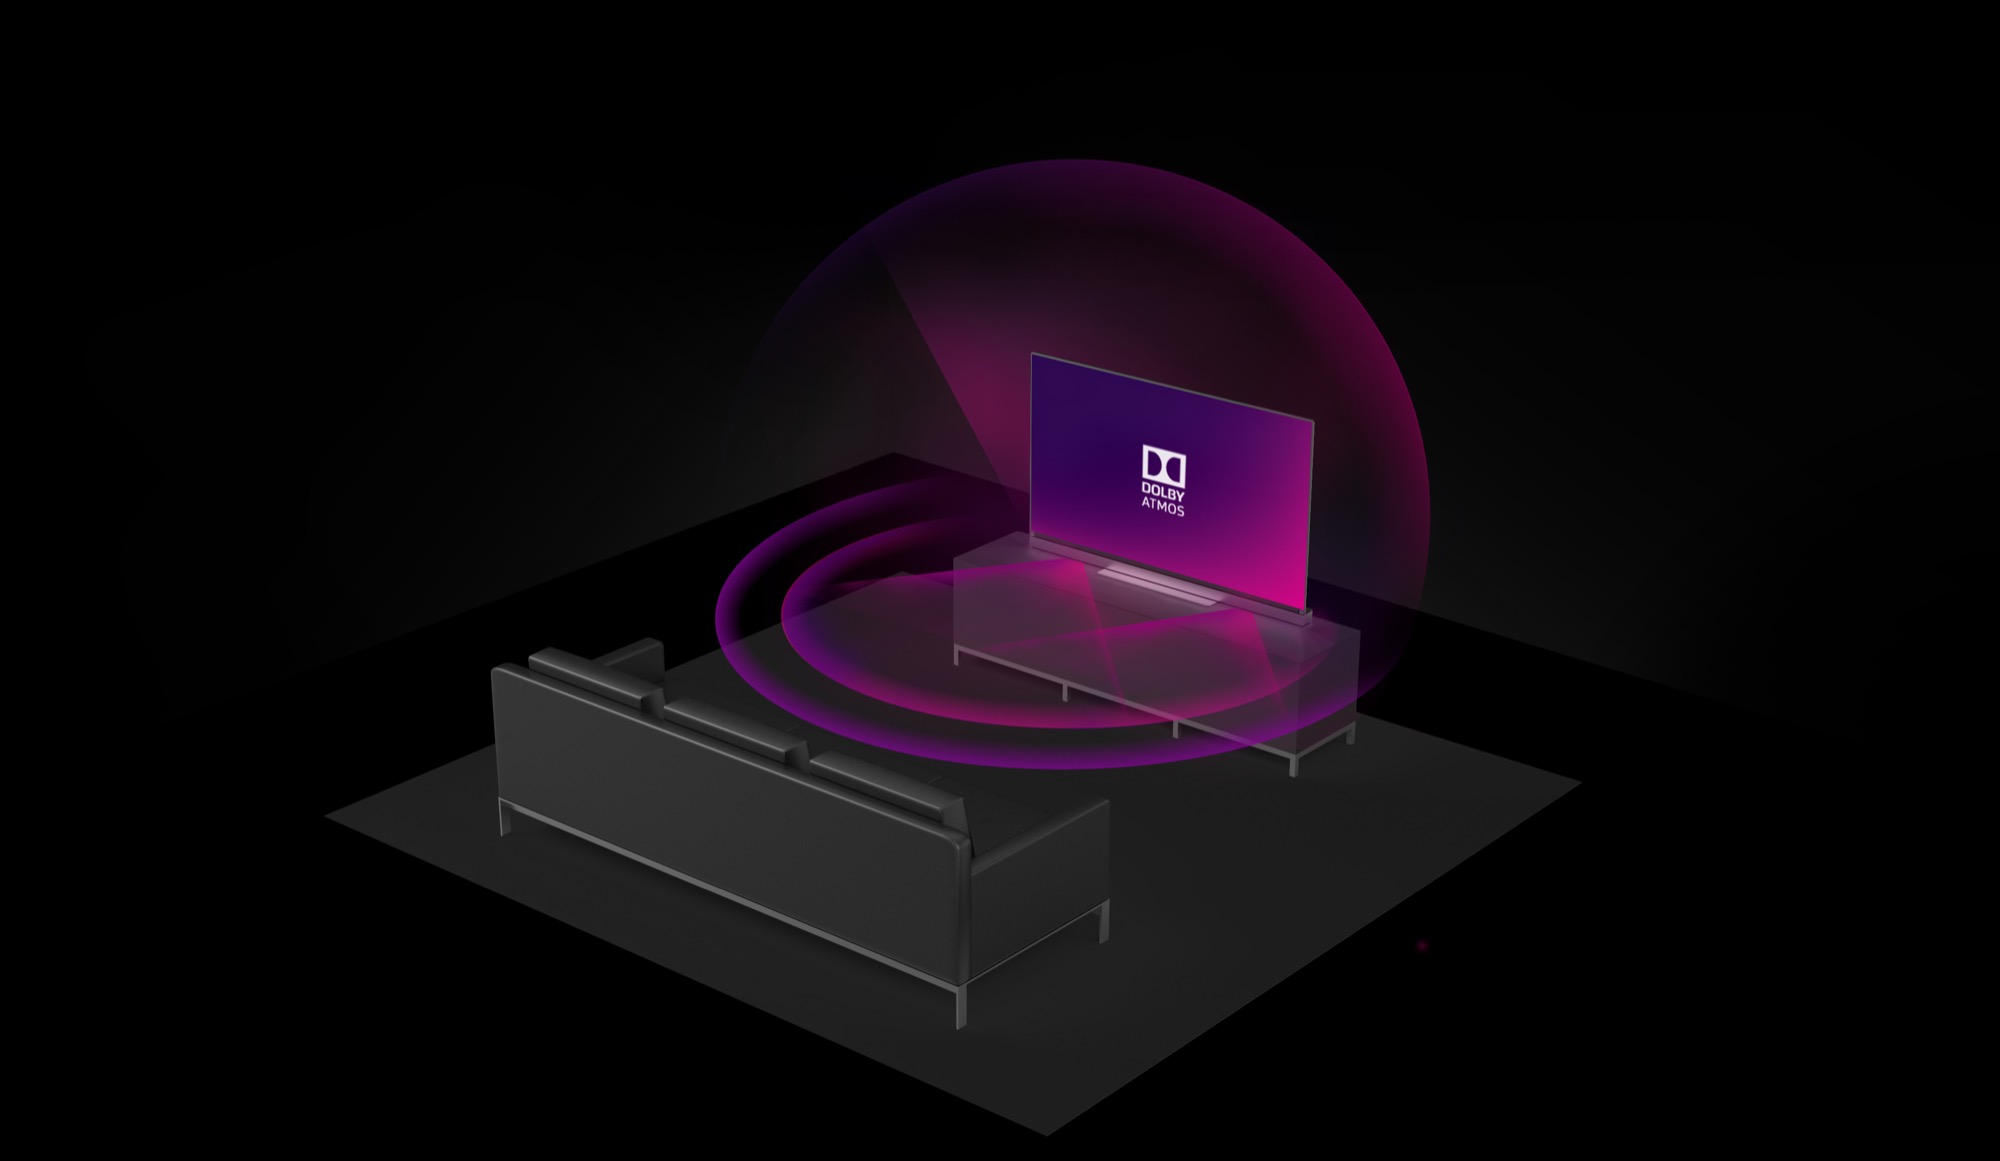 What is Dolby Atmos? All you need to know